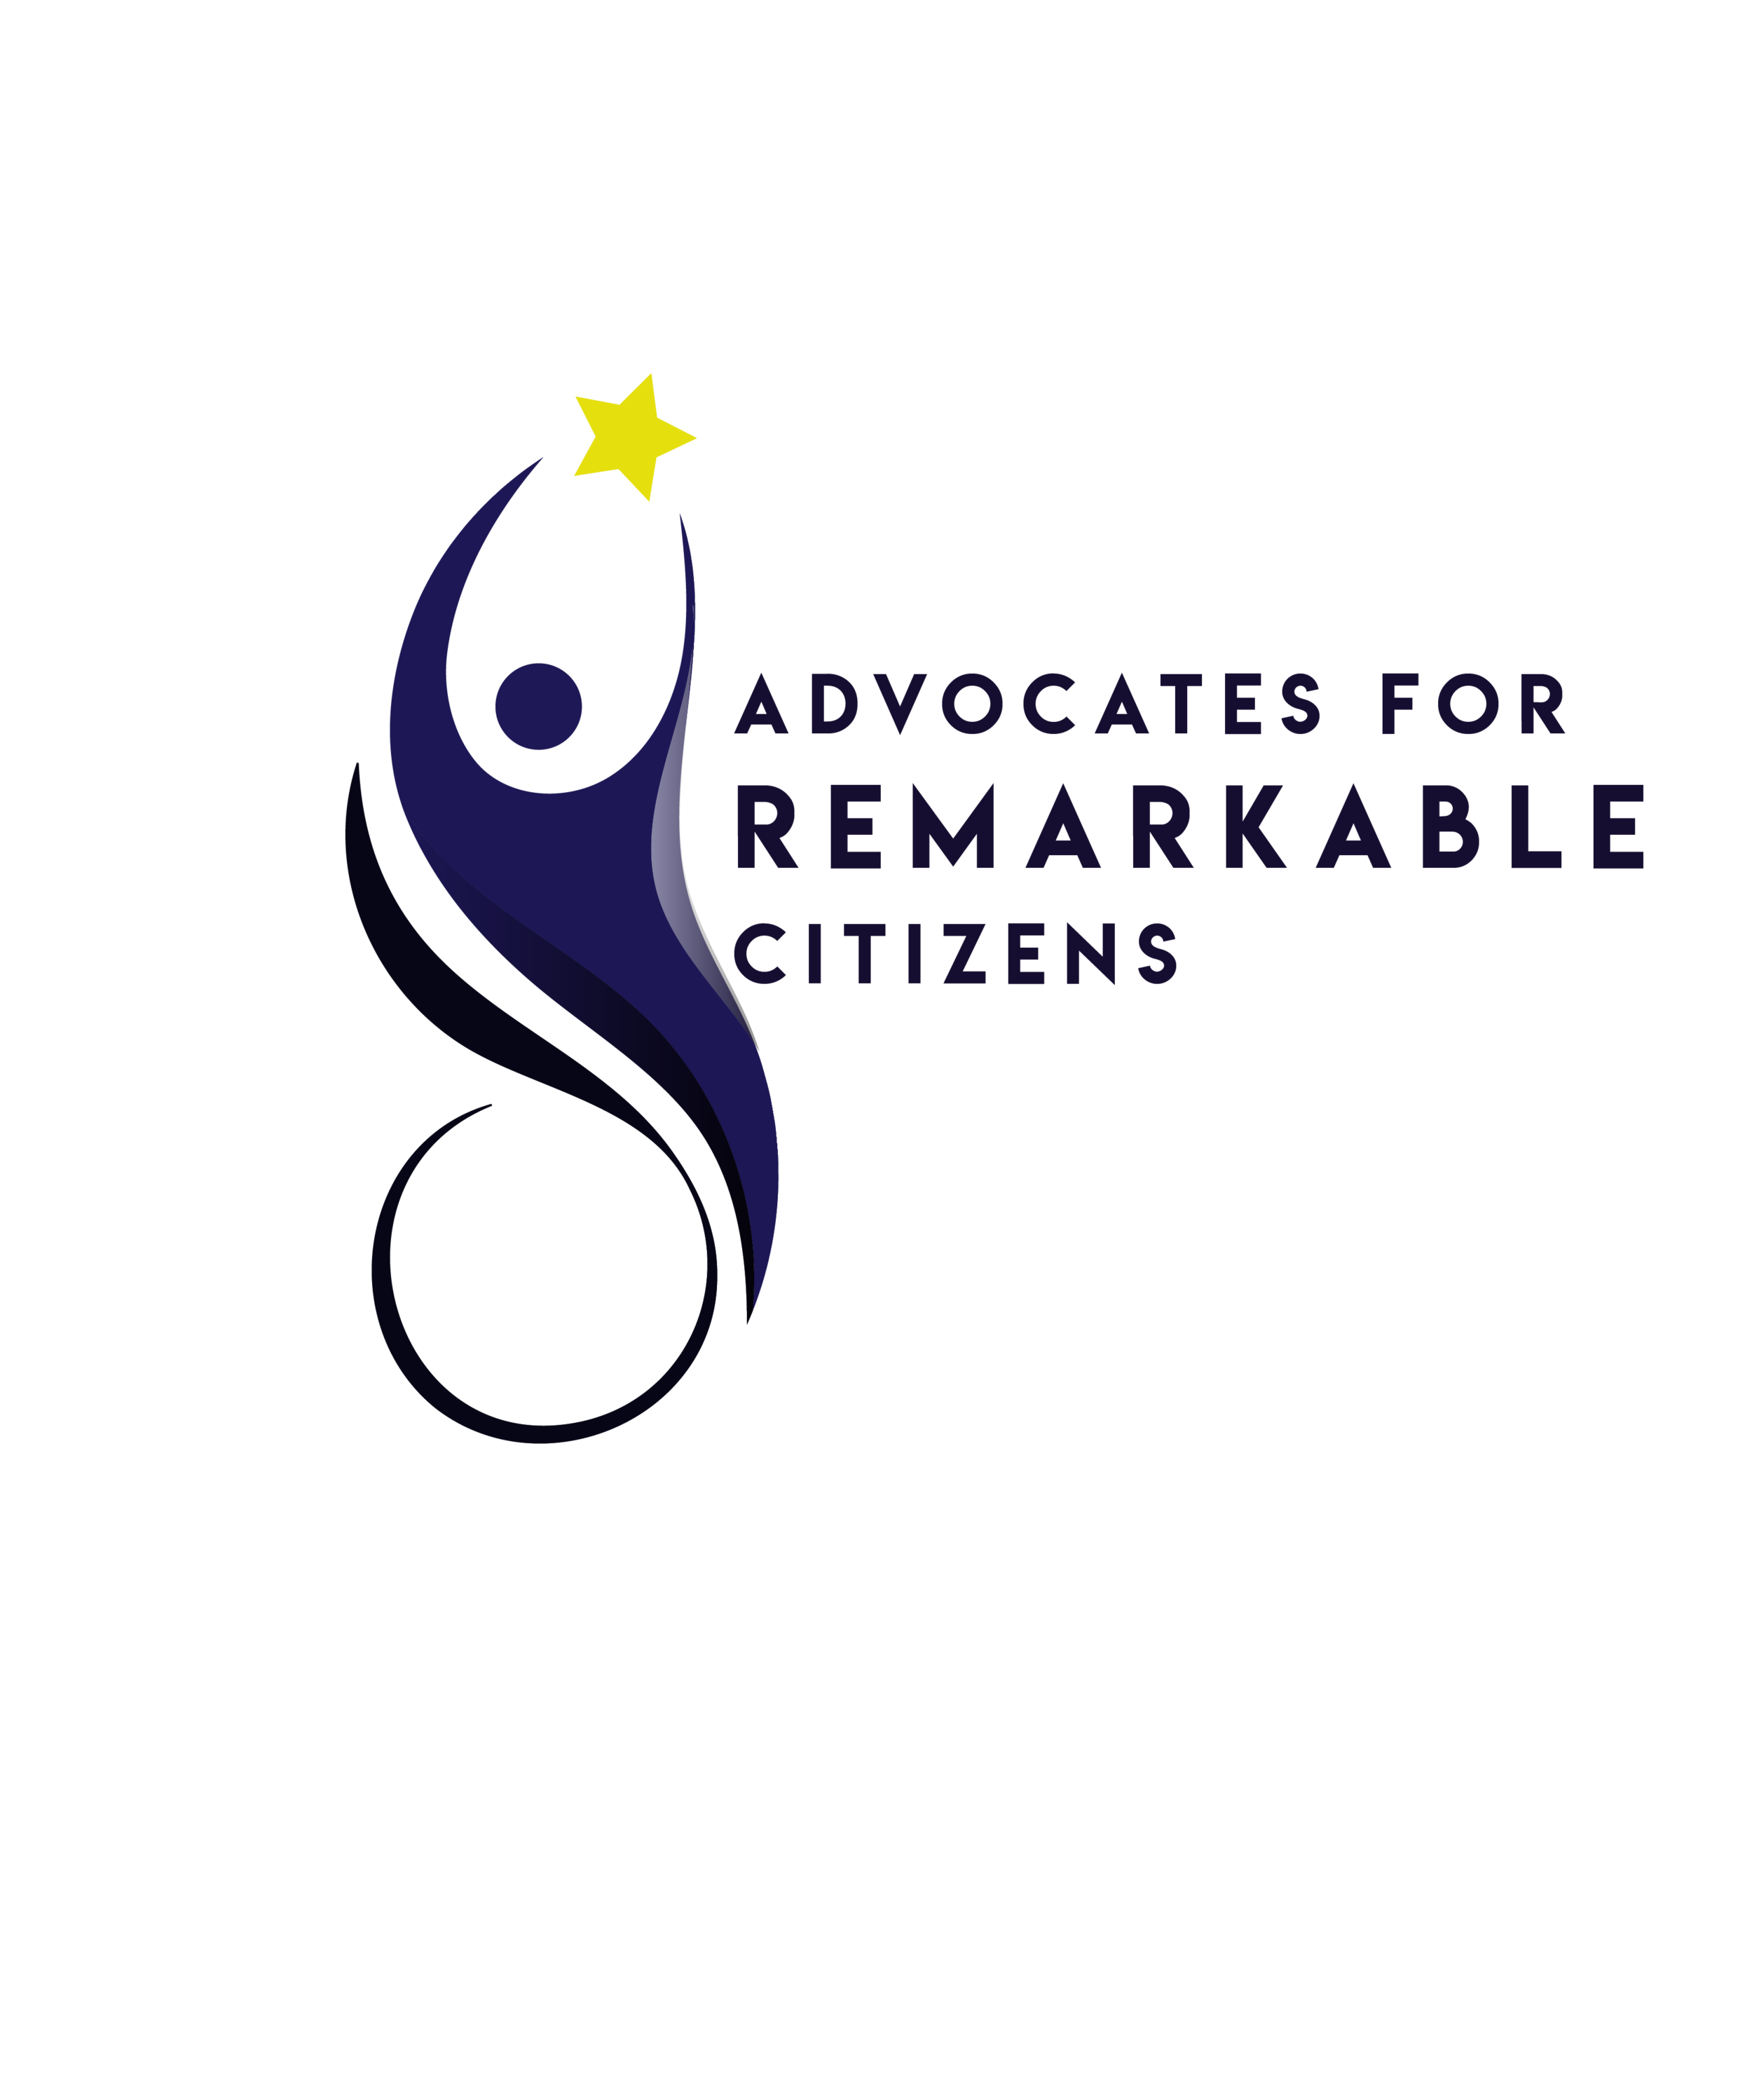 Advocates for Remarkable Citizens